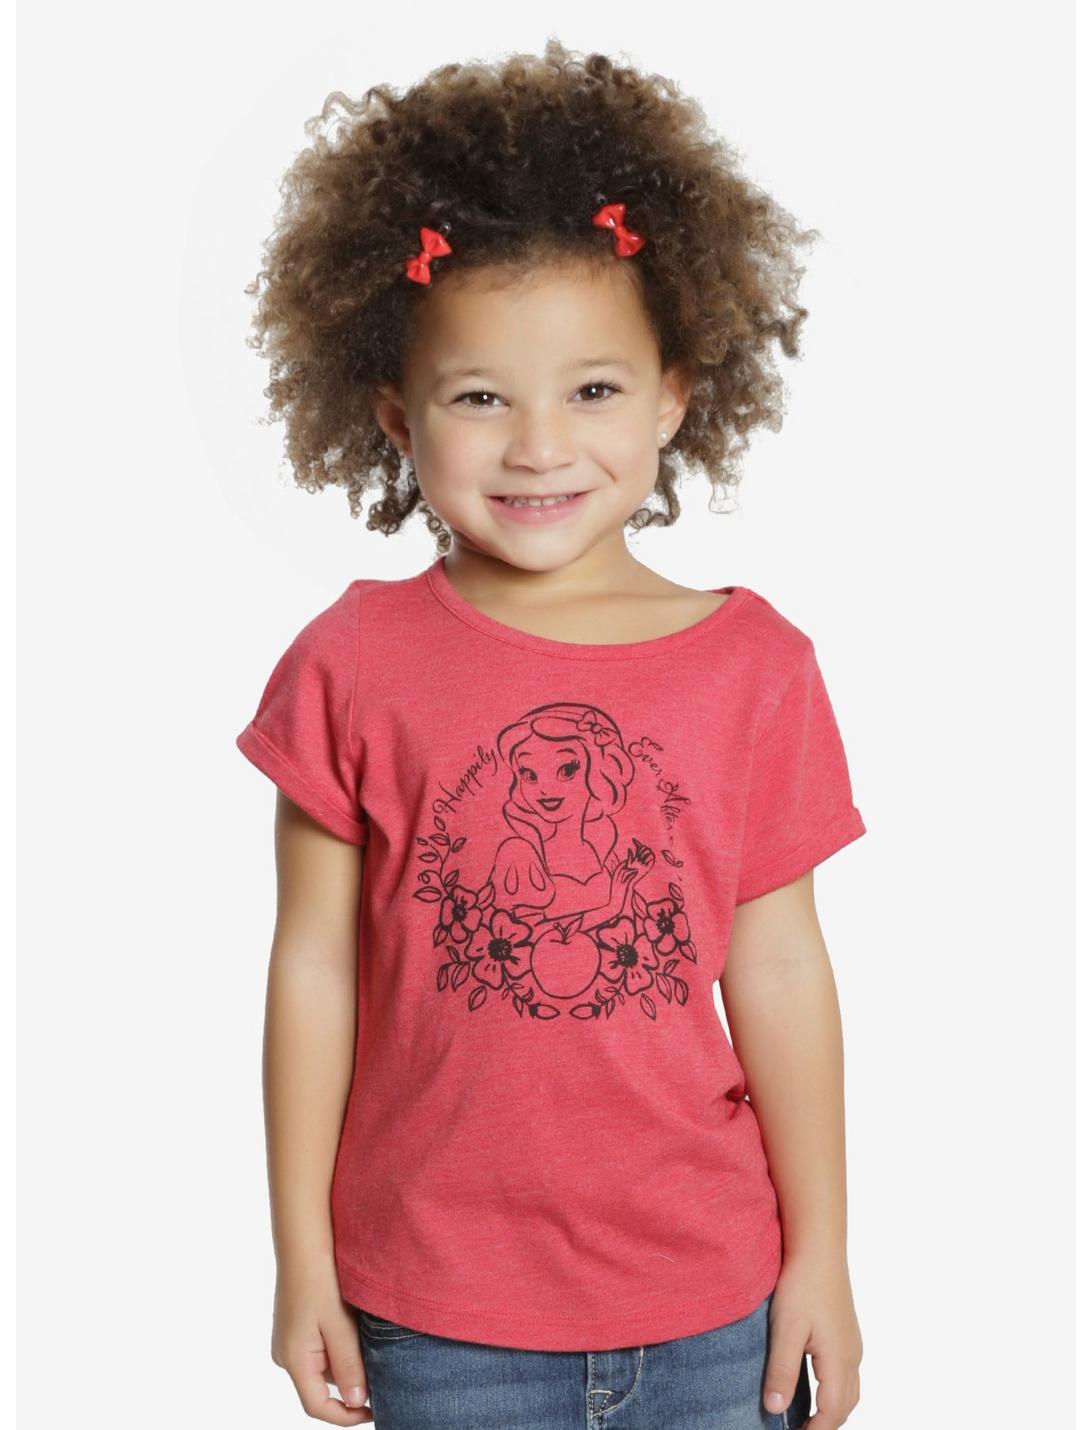 Disney Snow White And The Seven Dwarfs Silhouette Toddler Tee, RED, hi-res